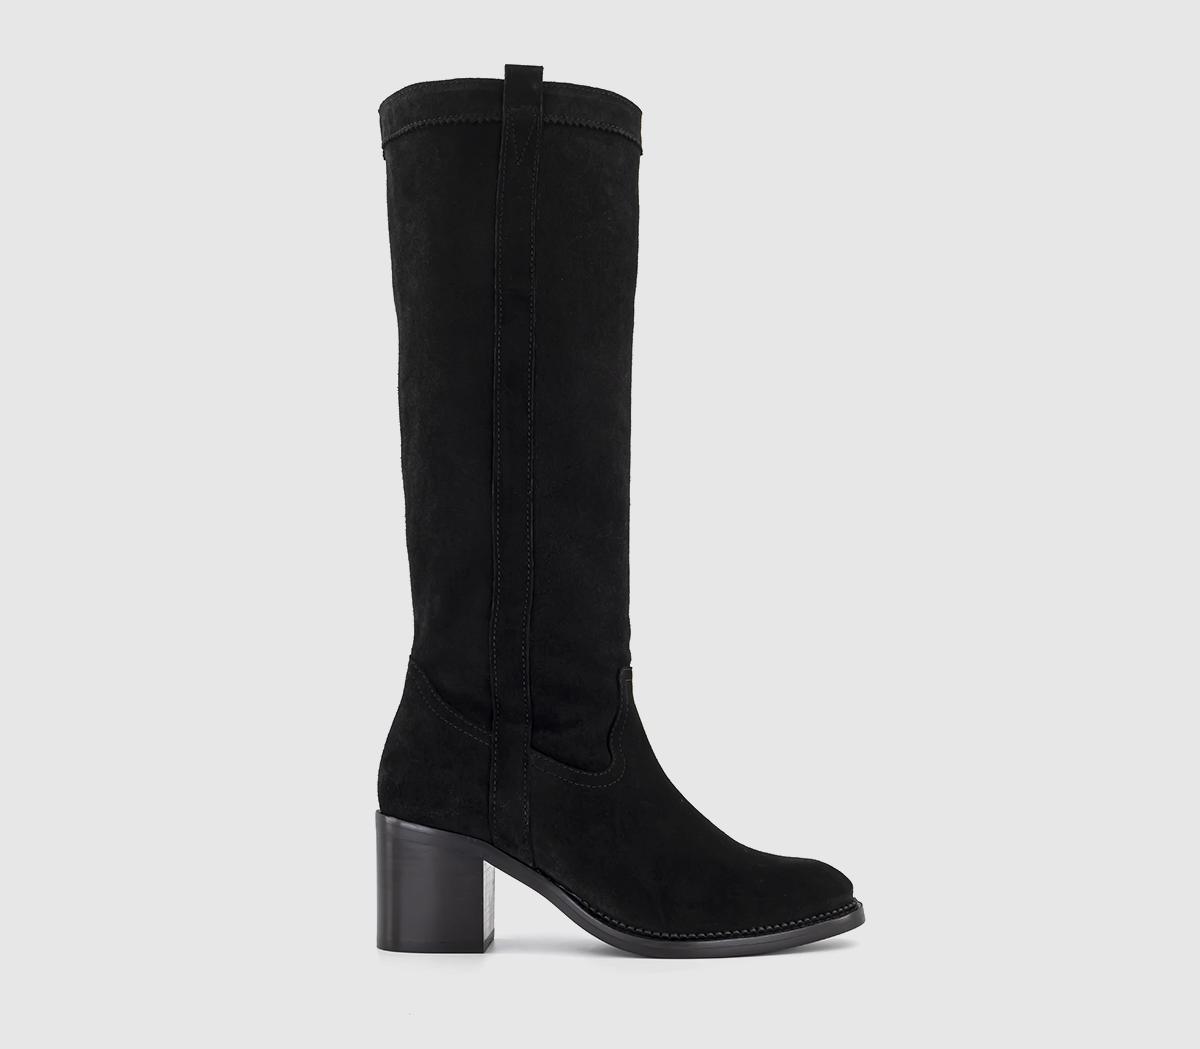 Knockout Heeled Knee High Boots Black Suede